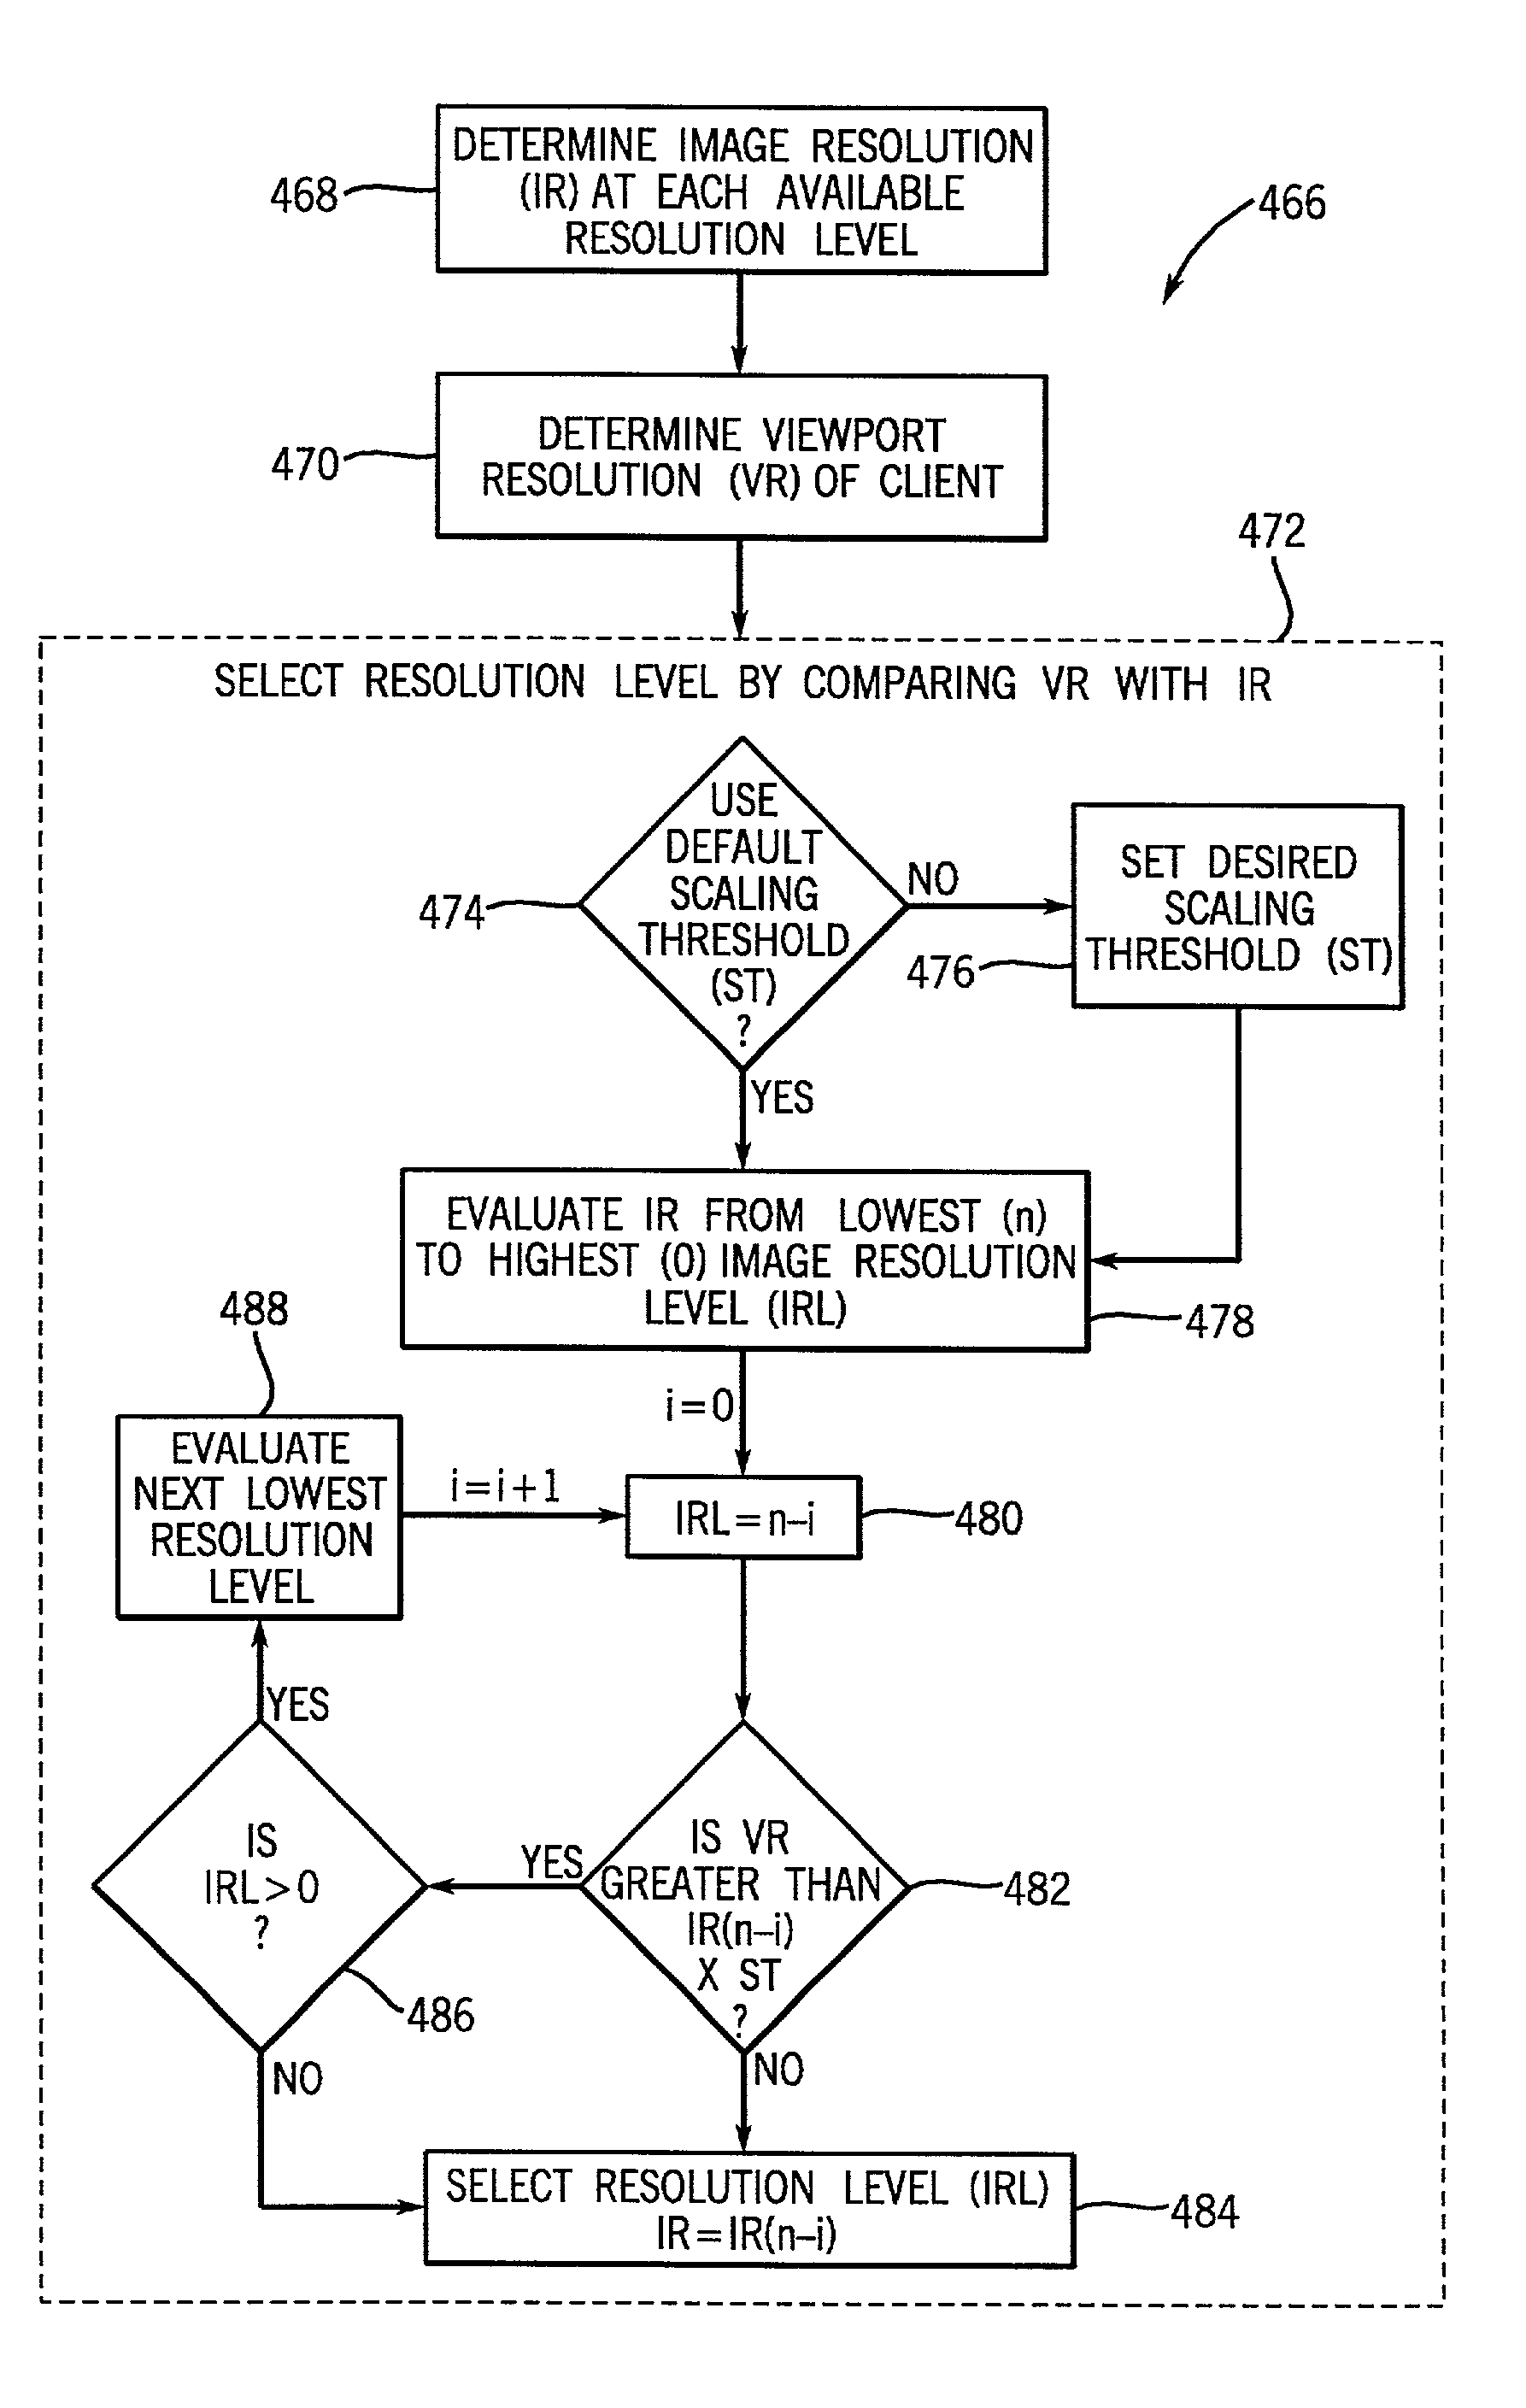 Method and apparatus for transmission and display of a compressed digitized image